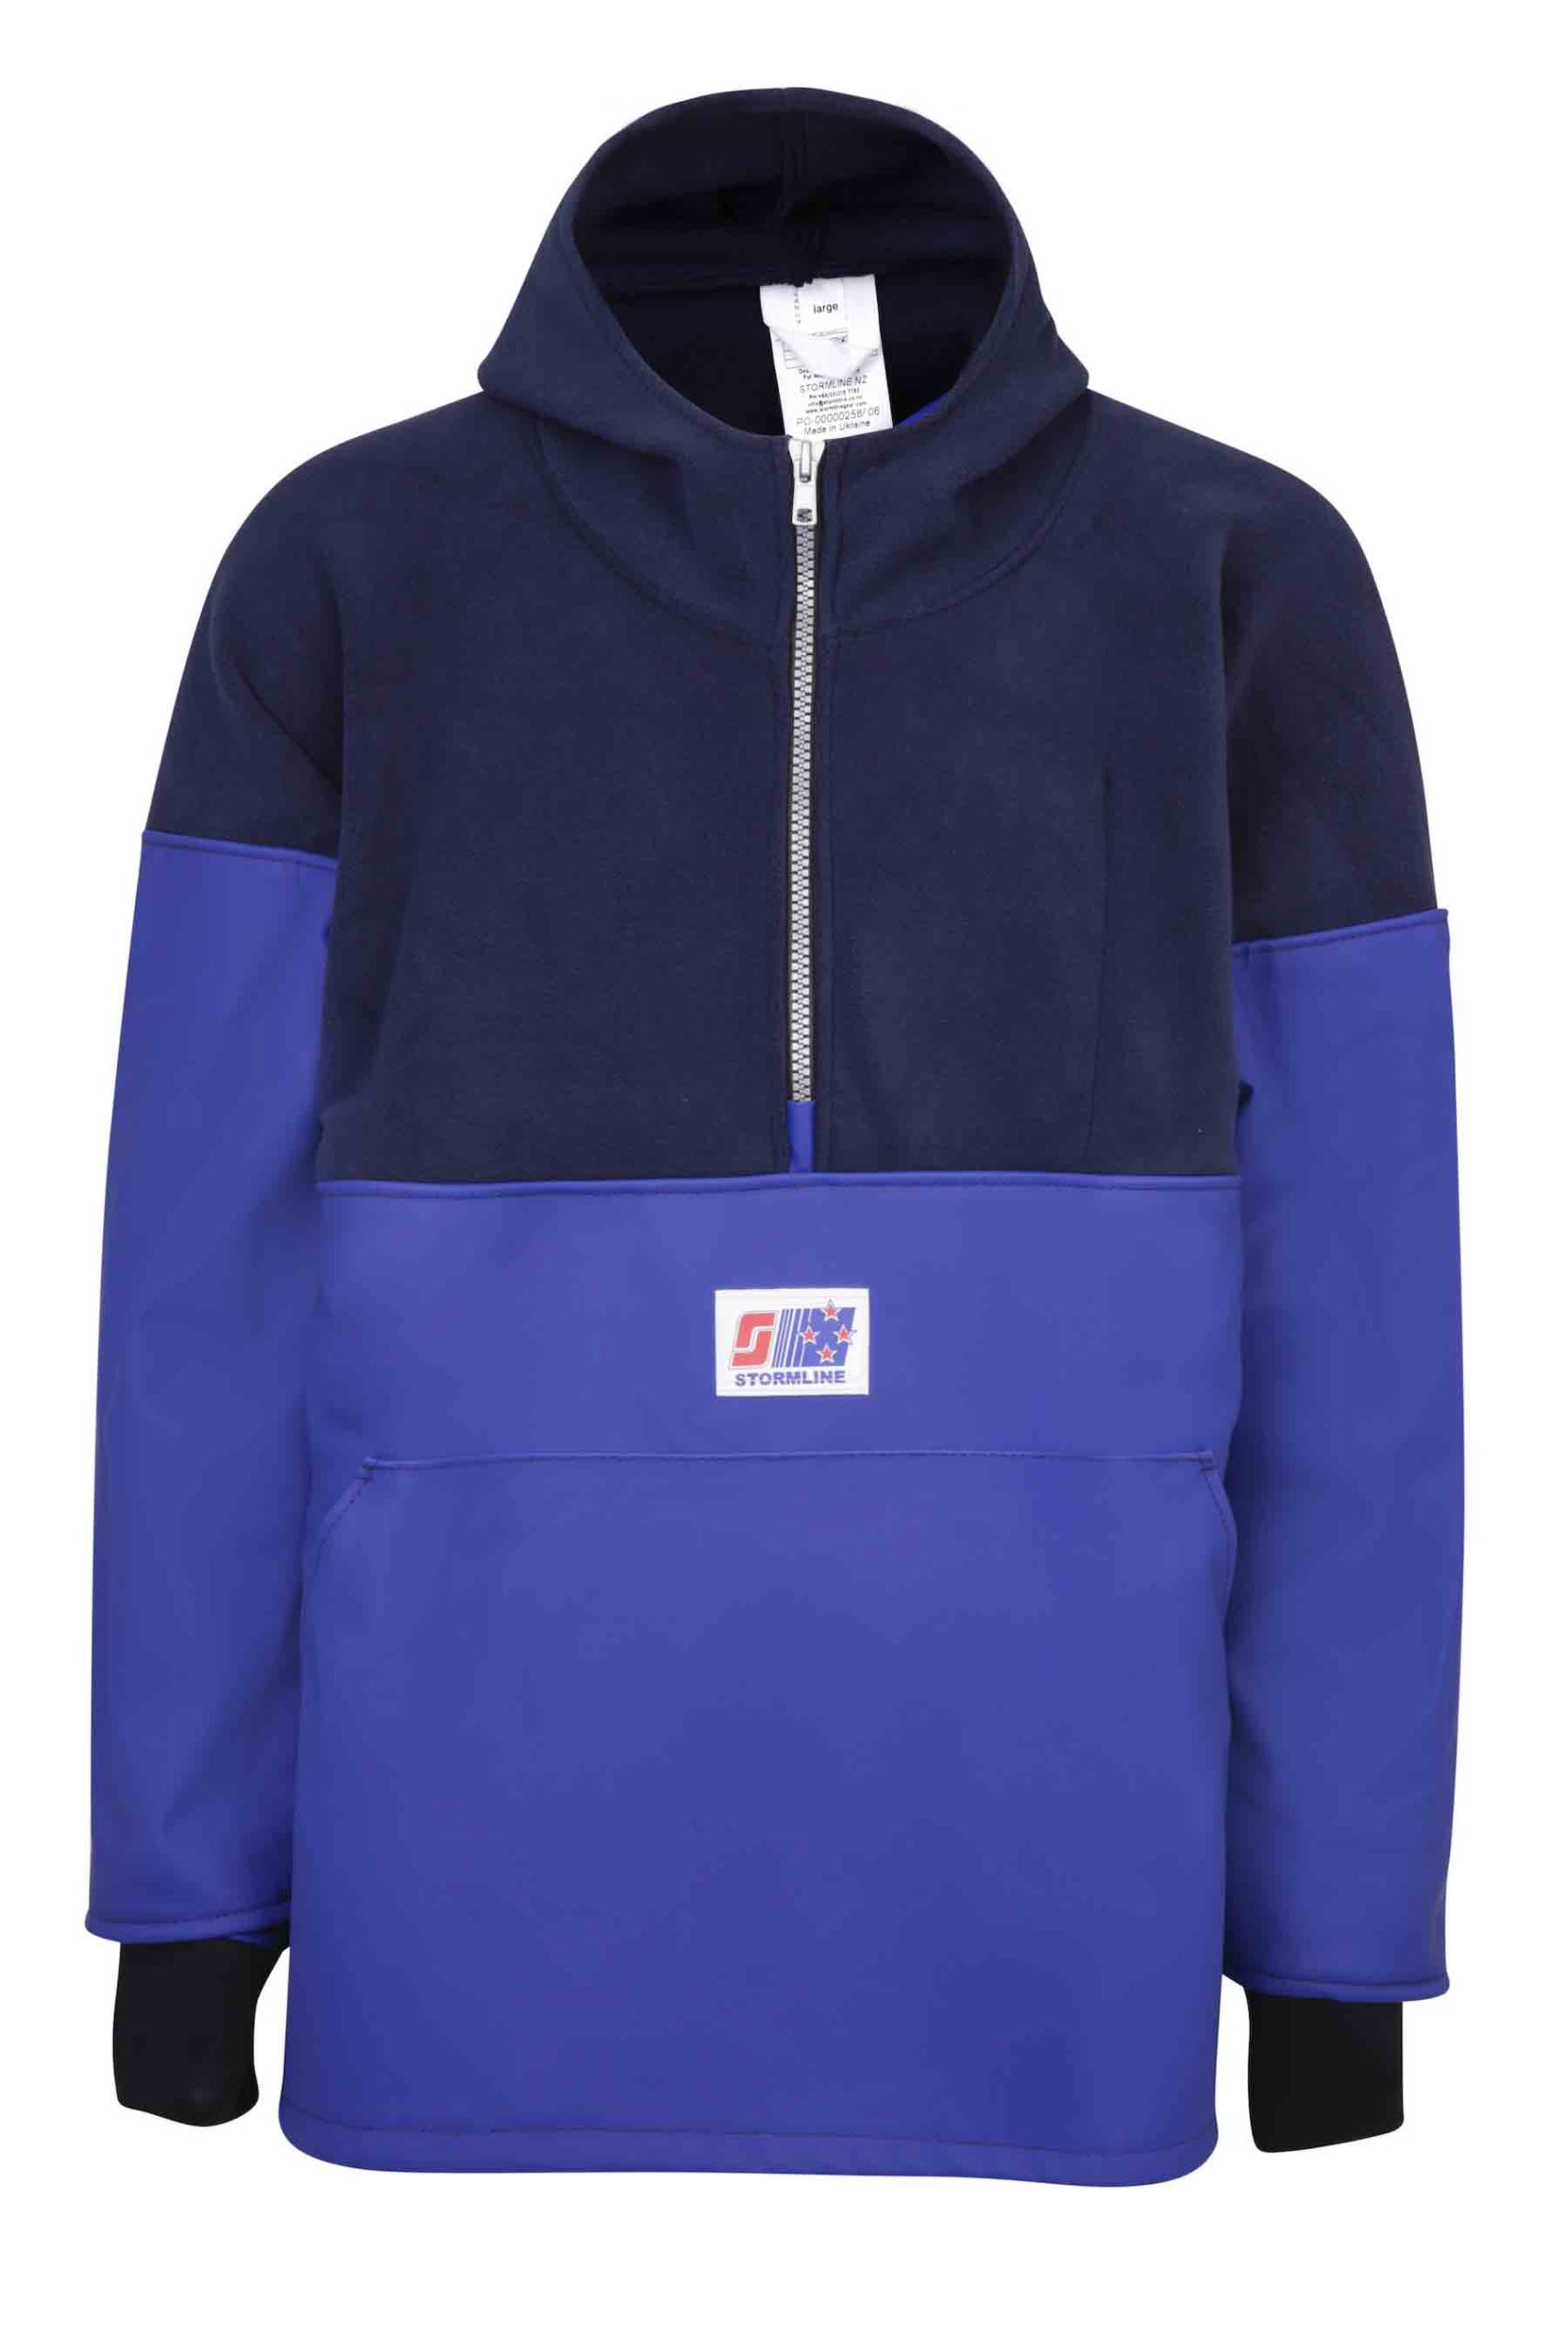  Next Day Delivery Items Prime Womens Fleece Lined